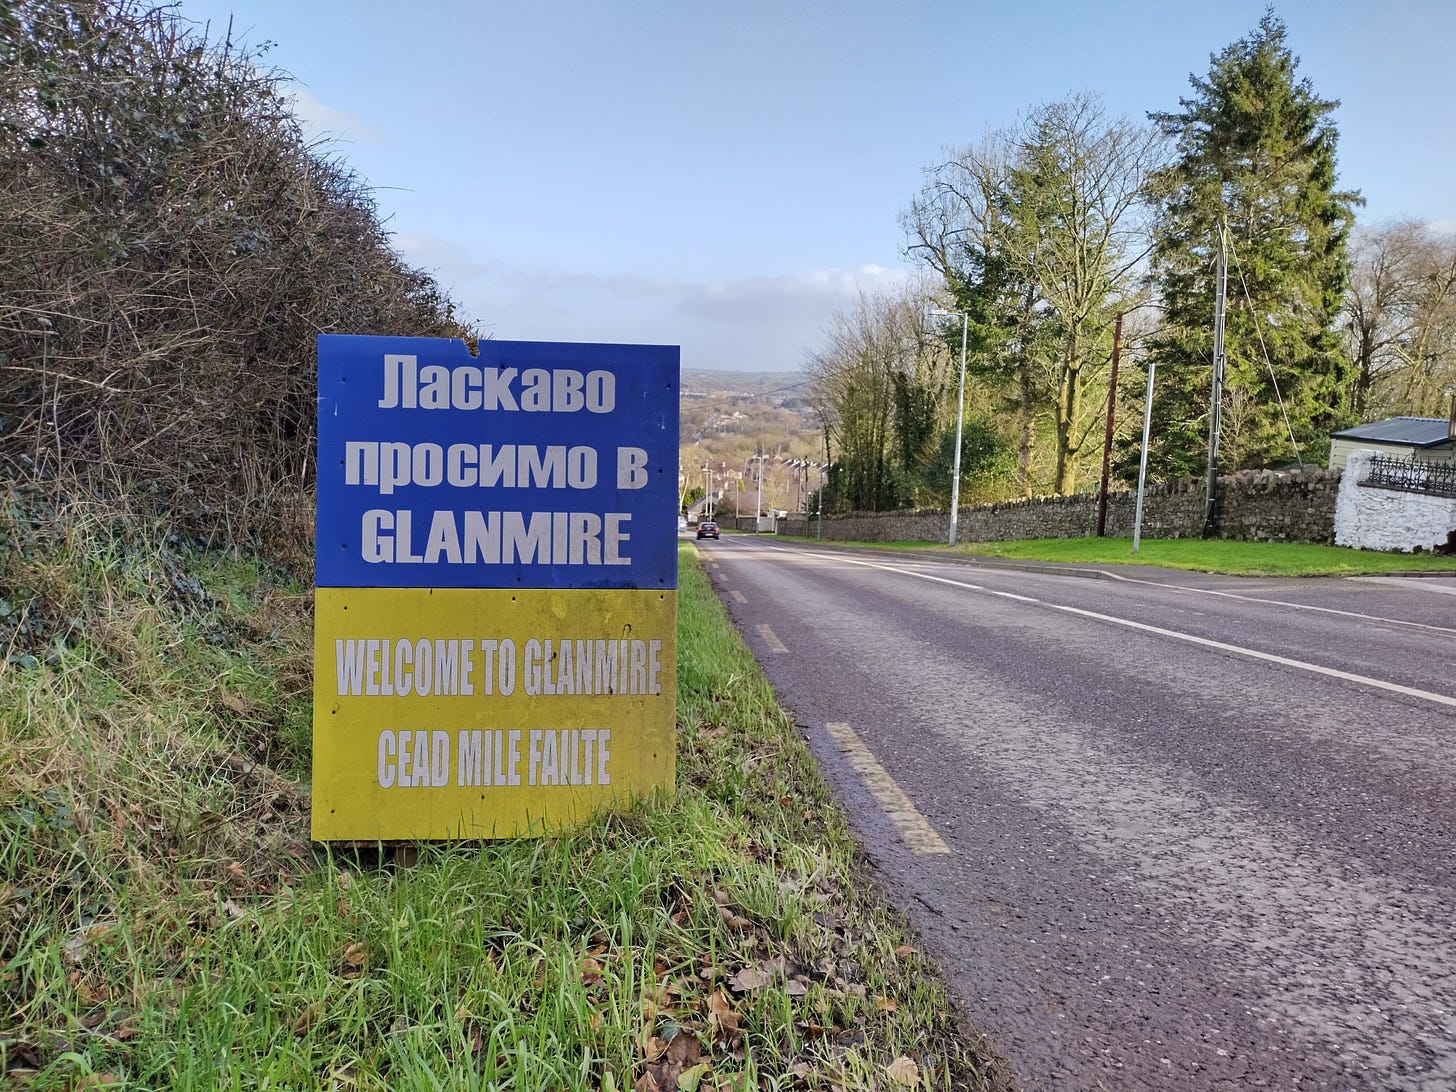 A sign welcoming Ukrainian refugees to Glanmire.